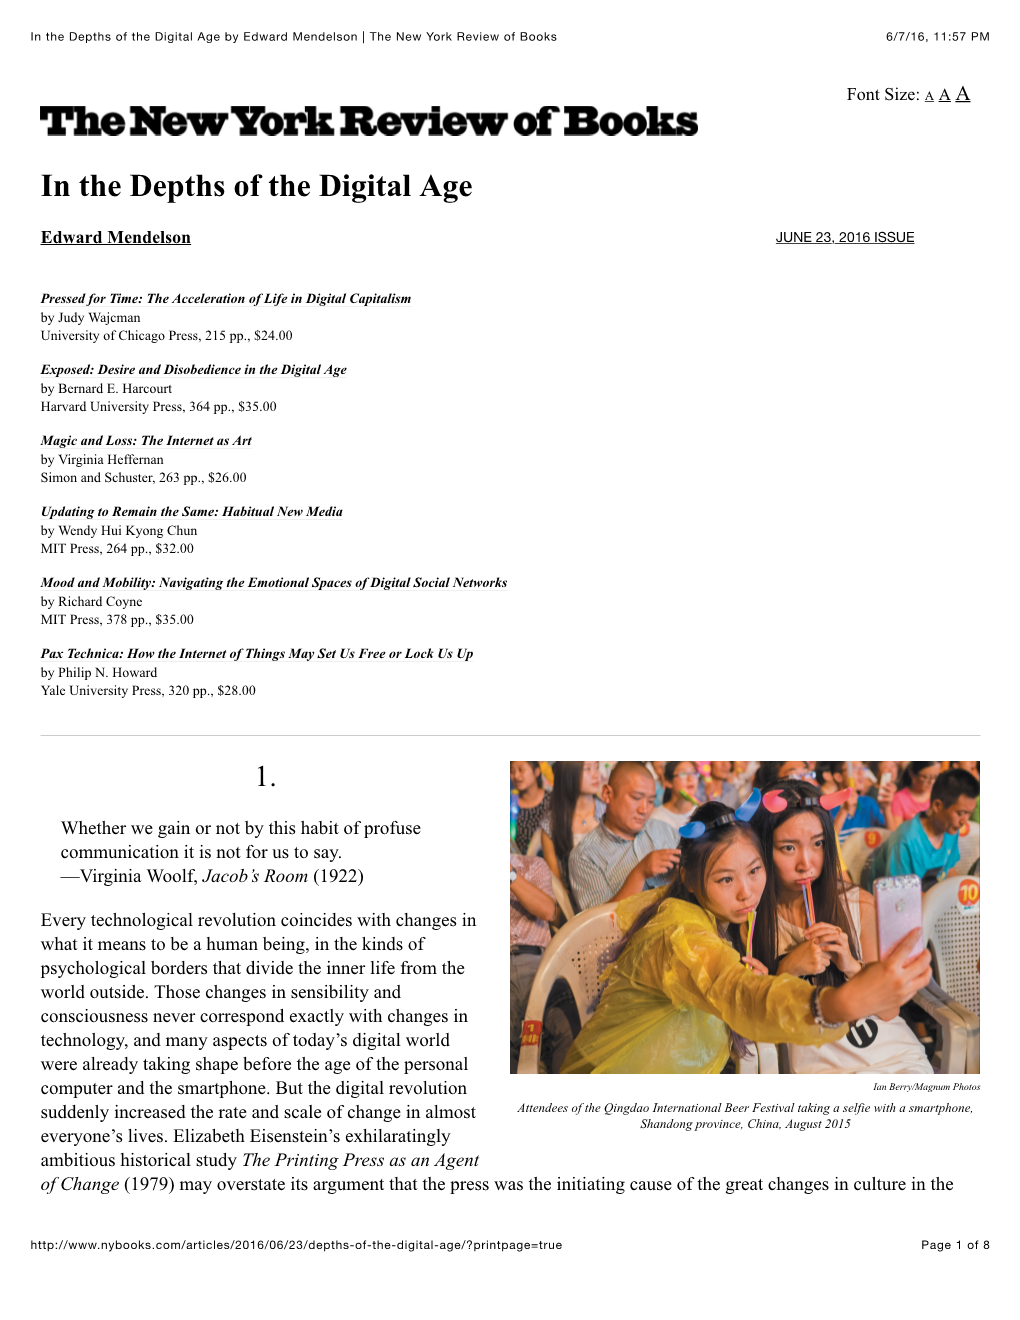 Mendelson's "In the Depths of the Digital Age"